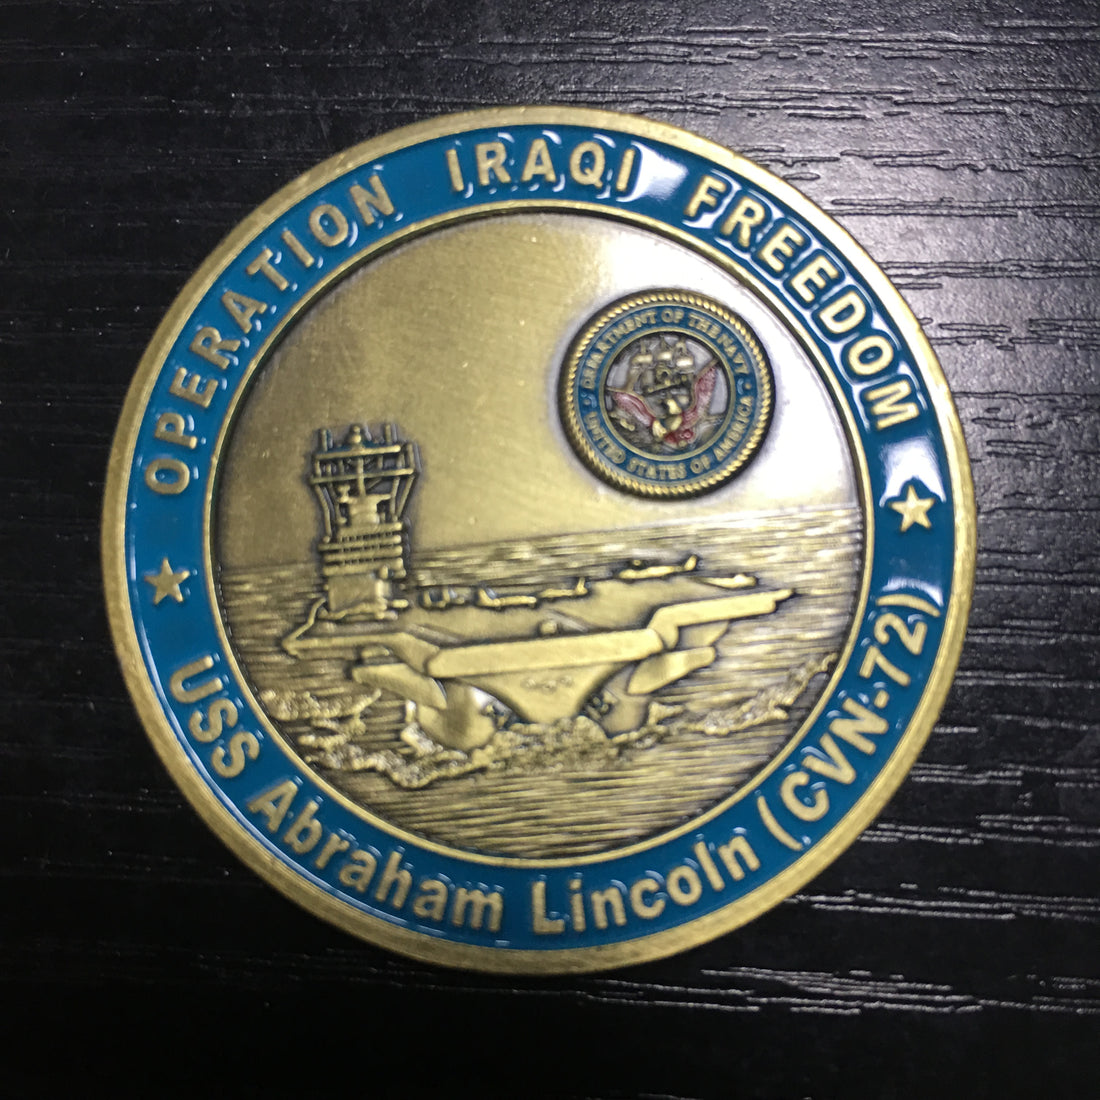 Challenge coin of Saint George pray for us, Operation Iraqi Freedom,USSAbraham Lincoin, CVN-72